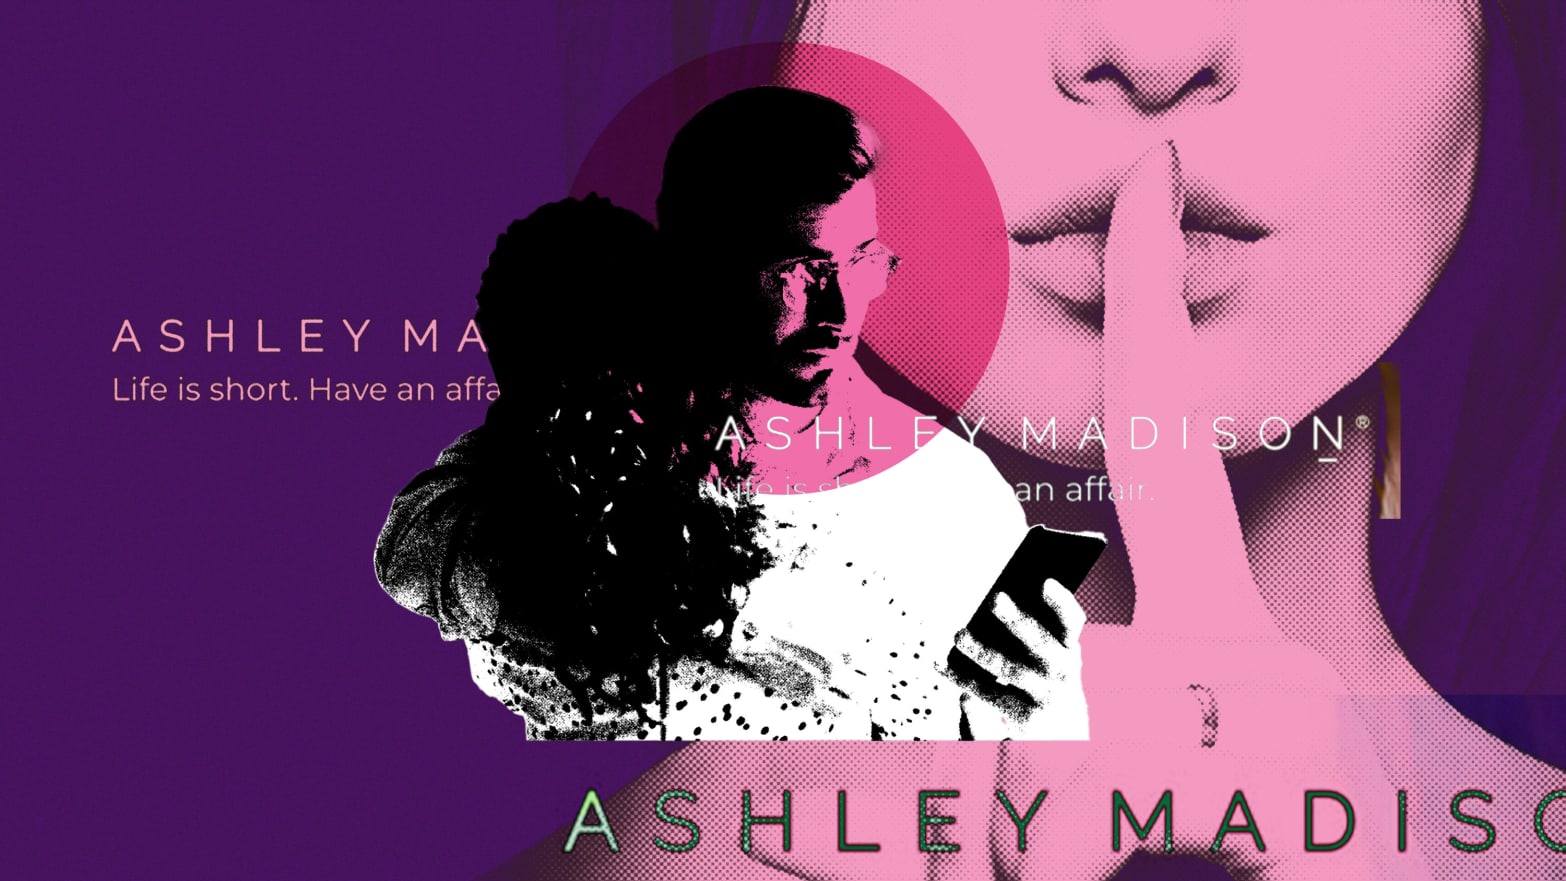 A photo illustration showing a man using his phone to cheat on his wife overlayed with the Ashley Madison logo